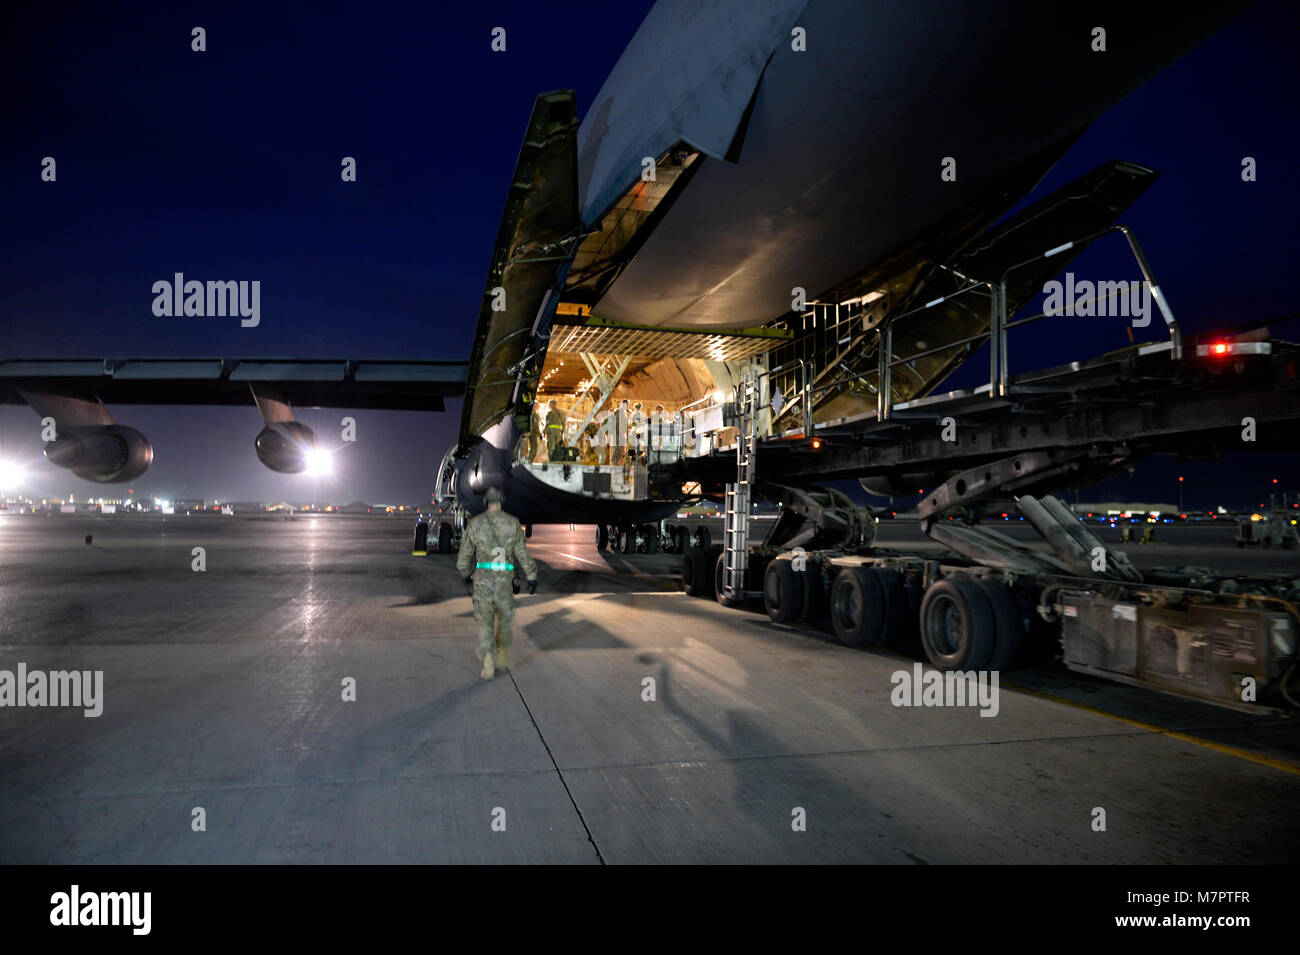 U.S. Air Force Airmen with the 455th Expeditionary Aerial Port Squadron load cargo into a C-17 Globemaster III loadmaster Sept. 9, 2014. Airmen assigned to the 455 EAPS have serviced more than 14,300 missions and 114,700 short tons of cargo since the beginning of the year to support Operation Enduring Freedom. (U.S. Air Force photo by Staff Sgt. Evelyn Chavez/Released) 455th Air Expeditionary Wing Bagram Airfield, Afghanistan Stock Photo